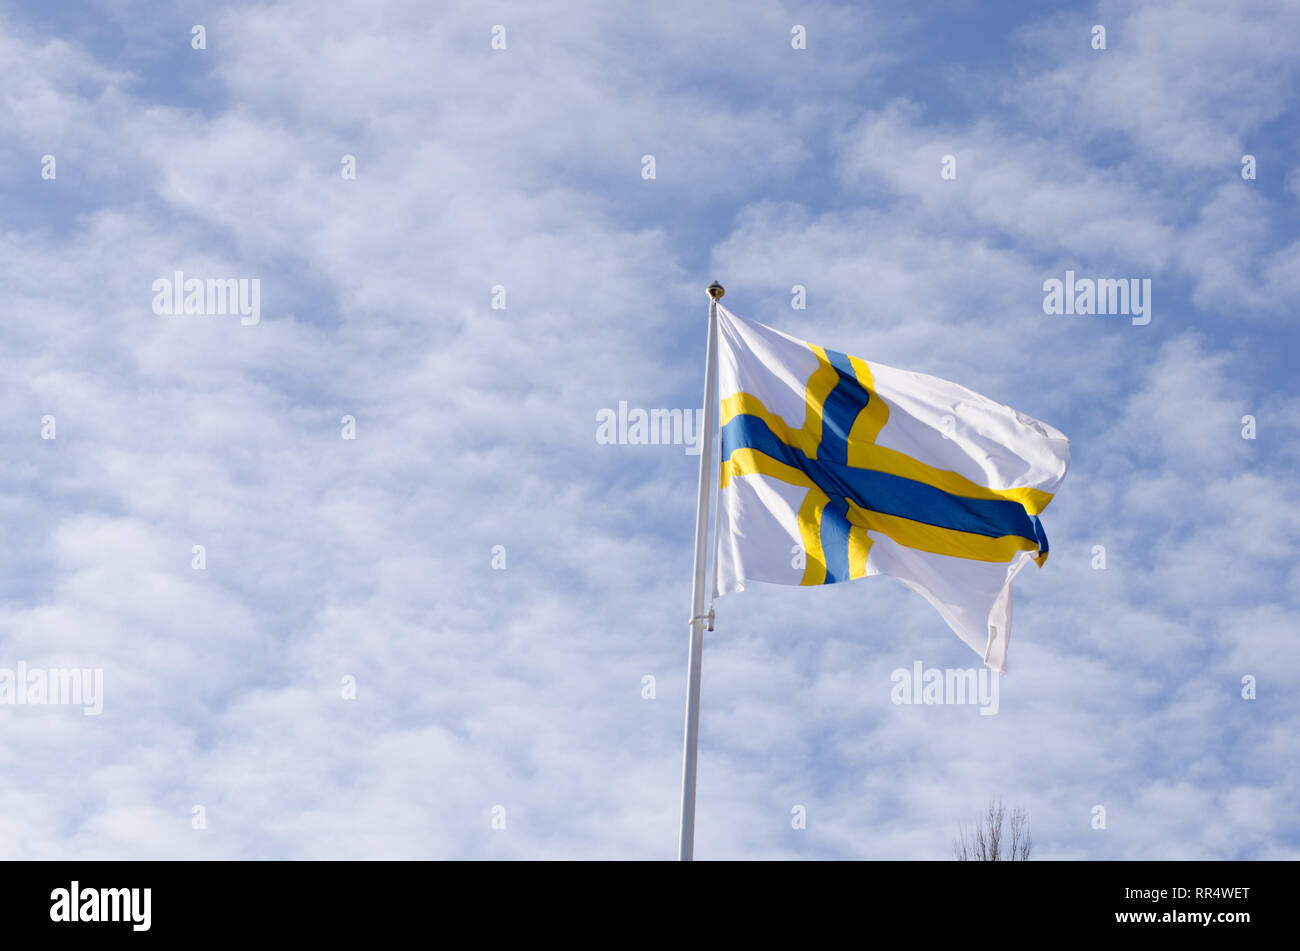 Stockholm, Sweden, 24th Feb 2019. February 24 celebrates the 'Sverigefinnarnas'day in Stockholm and around Sweden. The purpose of the day is to make the Swedish-Finnish minority visible and spread information about their history, language and culture.Here is a picture from Stockholm City Hall that flags with the Sweden-finnish flag in honor of the day. Credit: Jari Juntunen/Alamy Live News Stock Photo